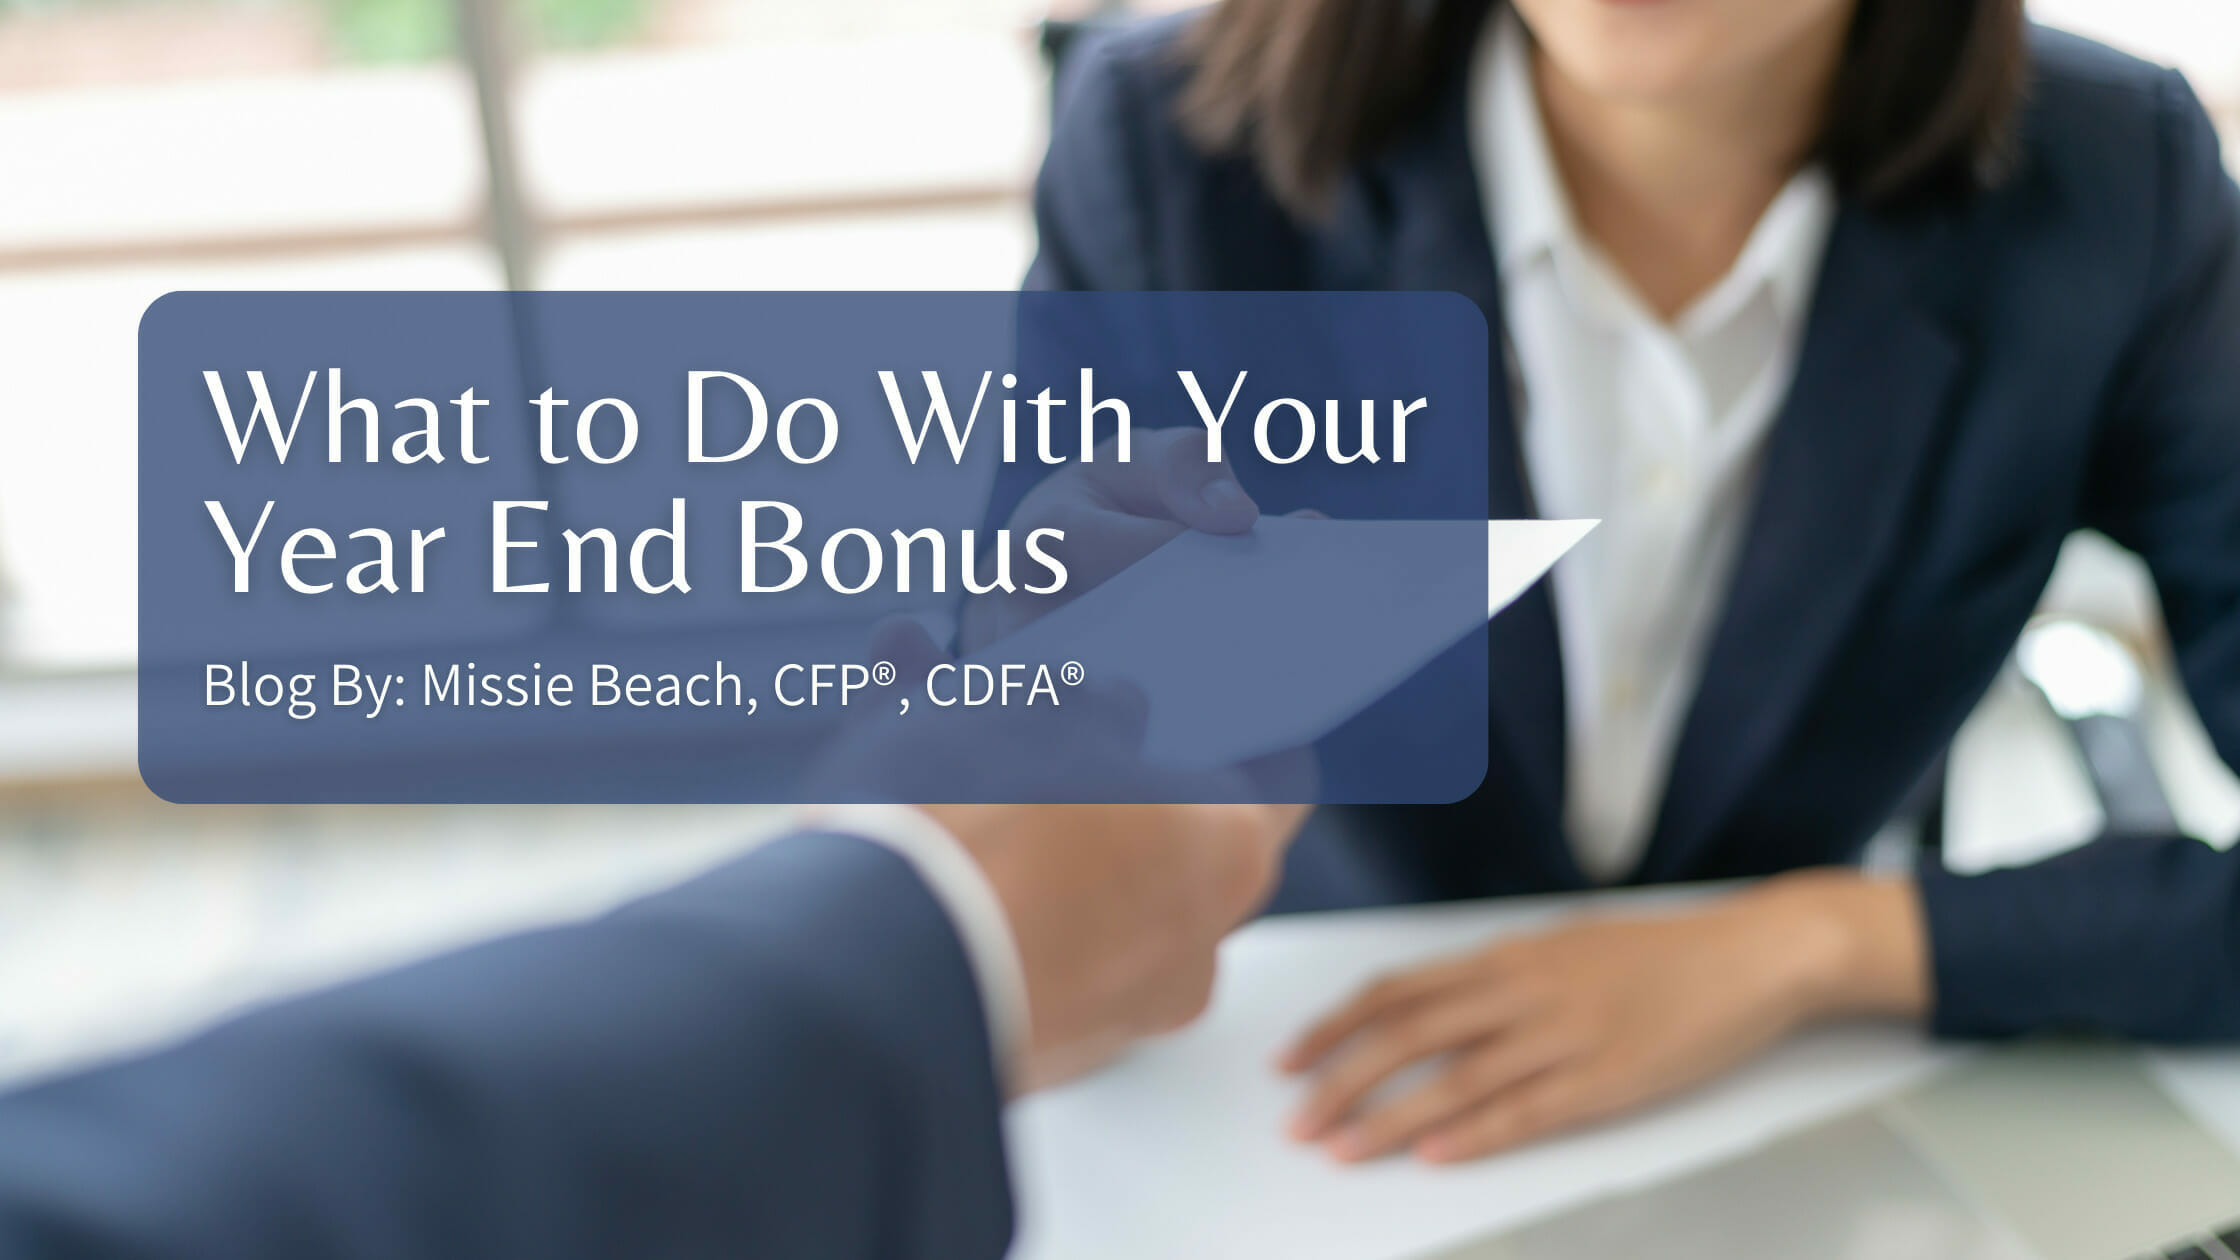 What to Do With Your Year-End Bonus